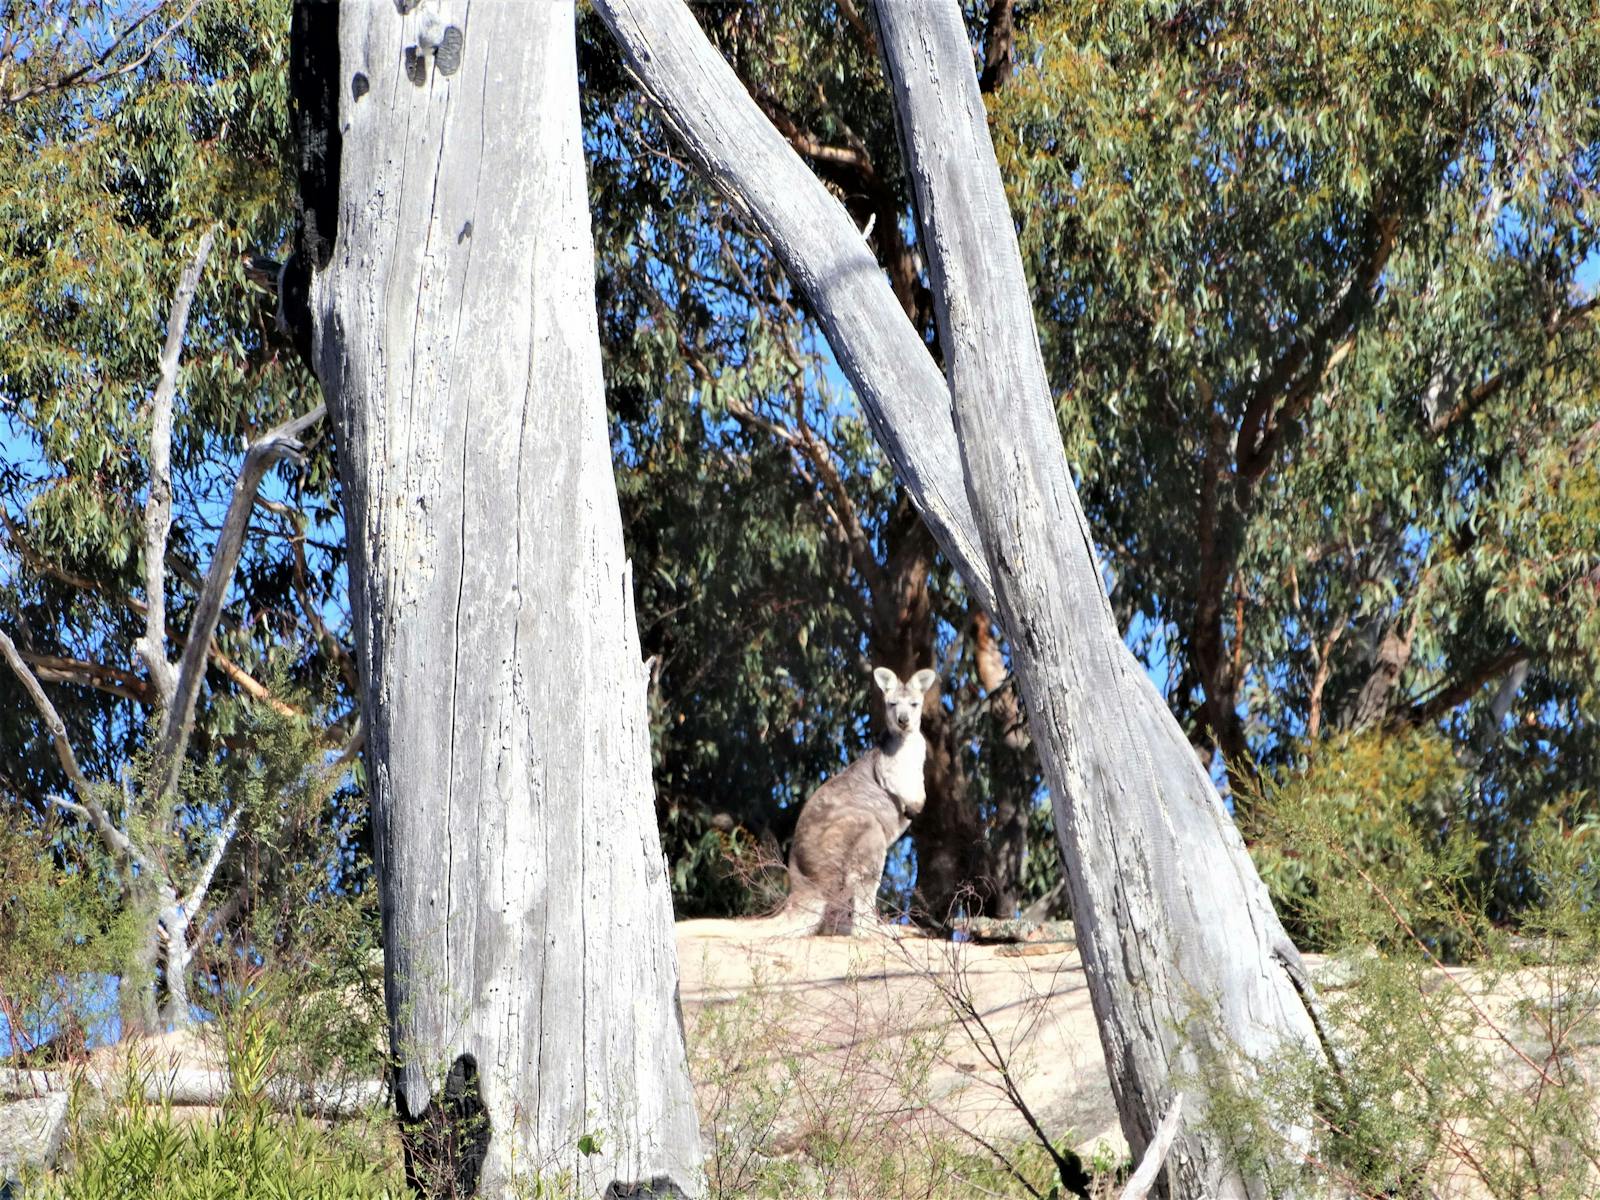 The Wallaroo is one of four macropod species sighted regularly at Grasstrees PNR